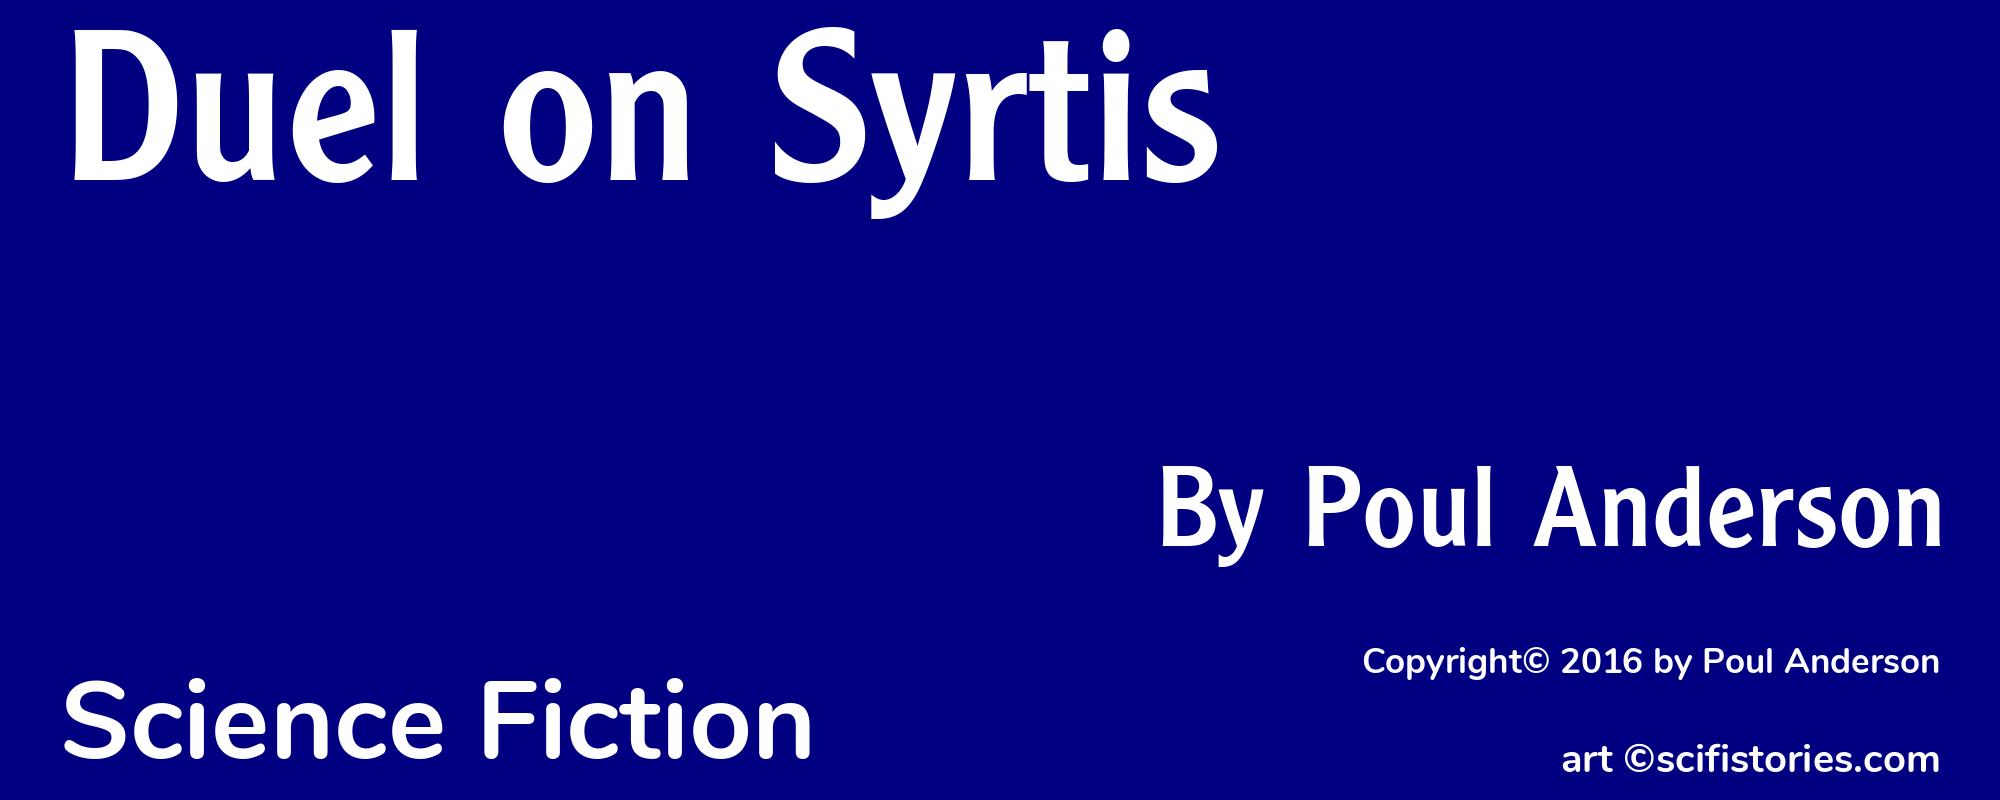 Duel on Syrtis - Cover